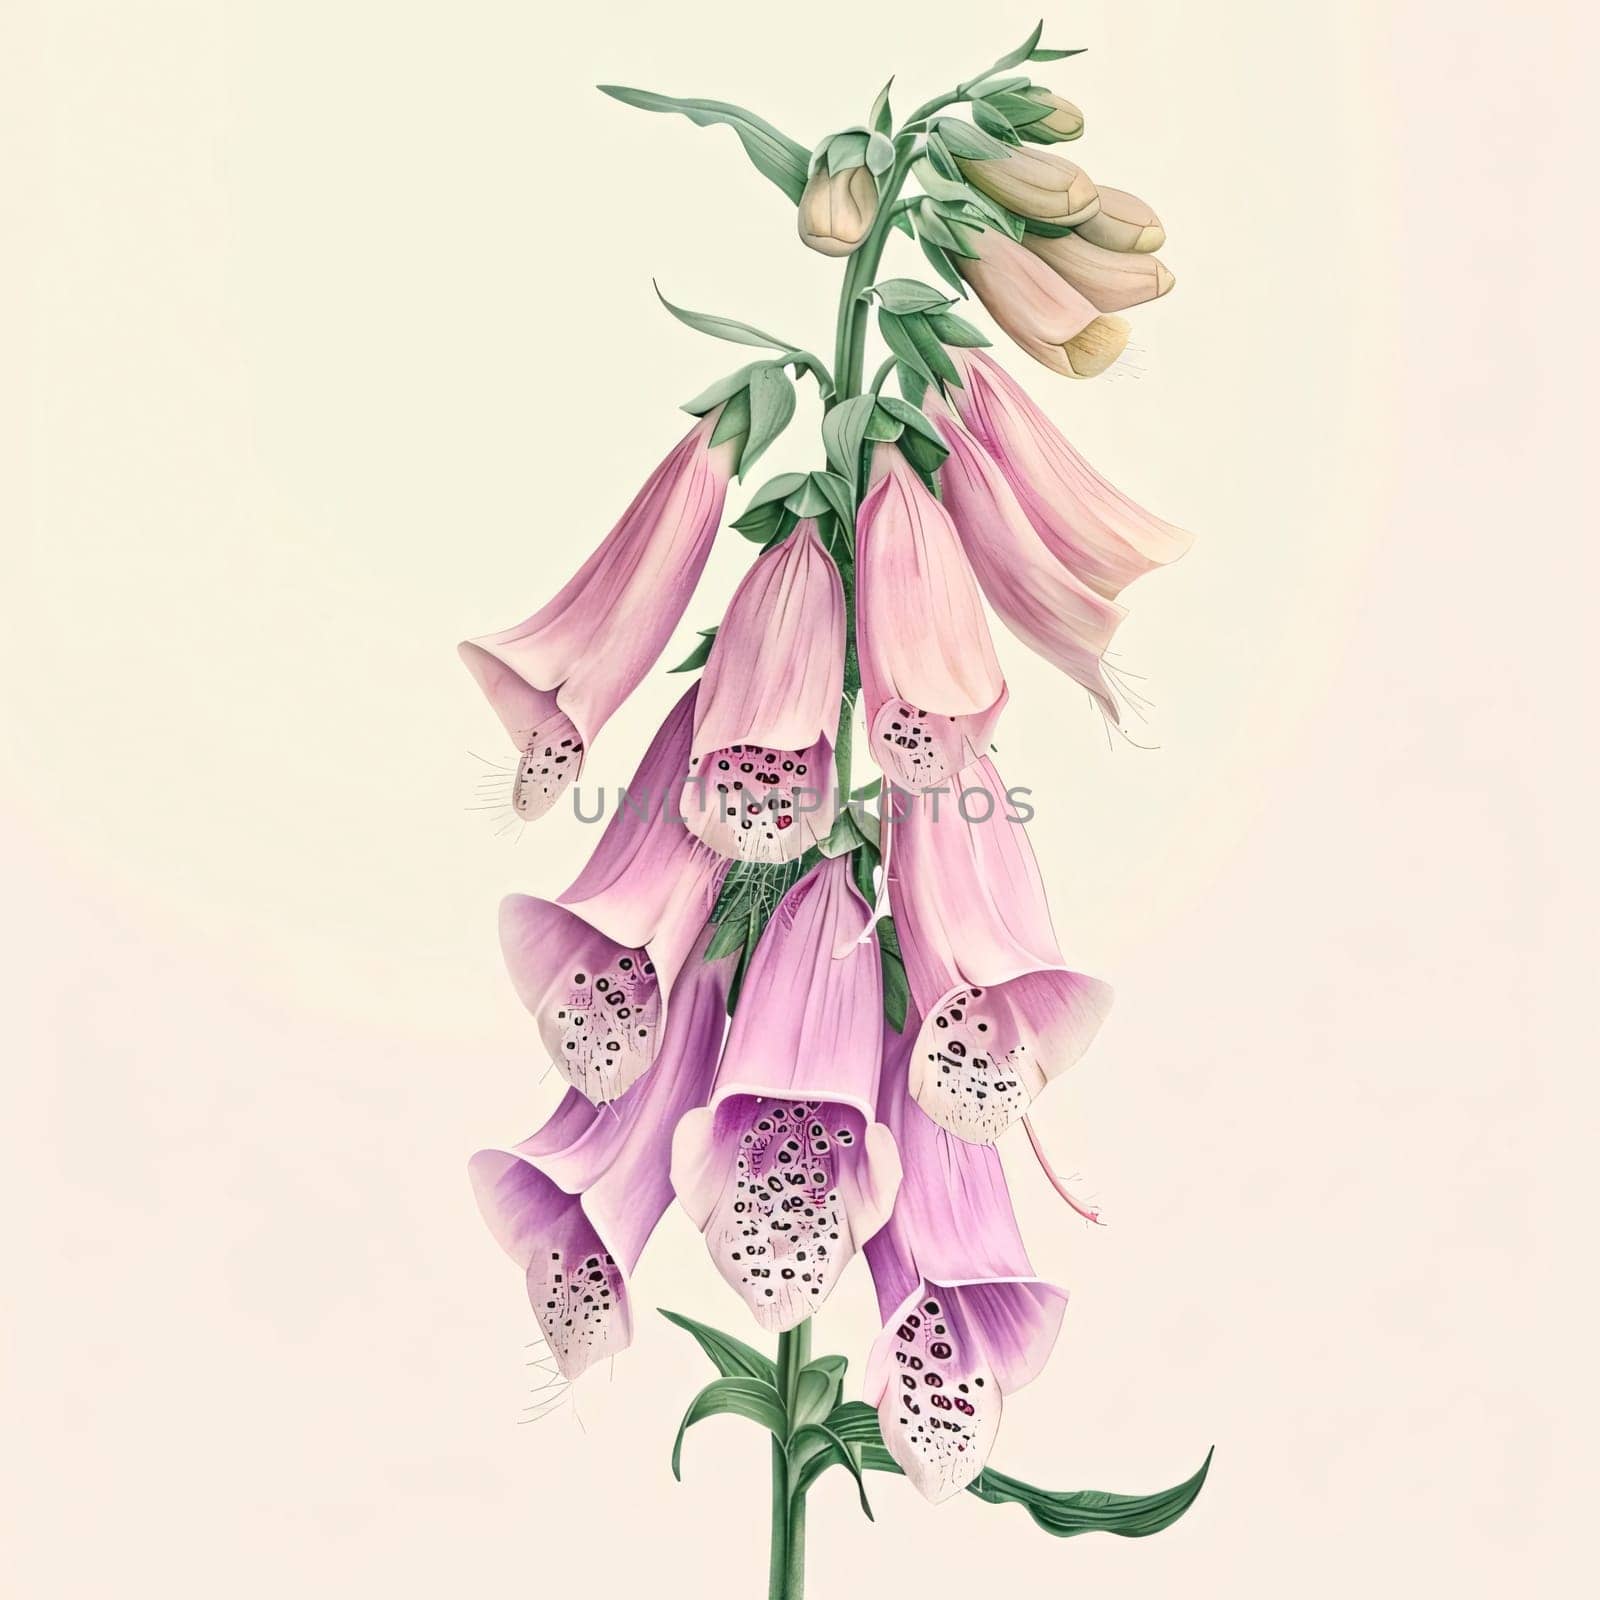 Drawn, painted flowers: purple pink foxglove flowers with green stem and leaves. Flowering flowers, a symbol of spring, new life. by ThemesS